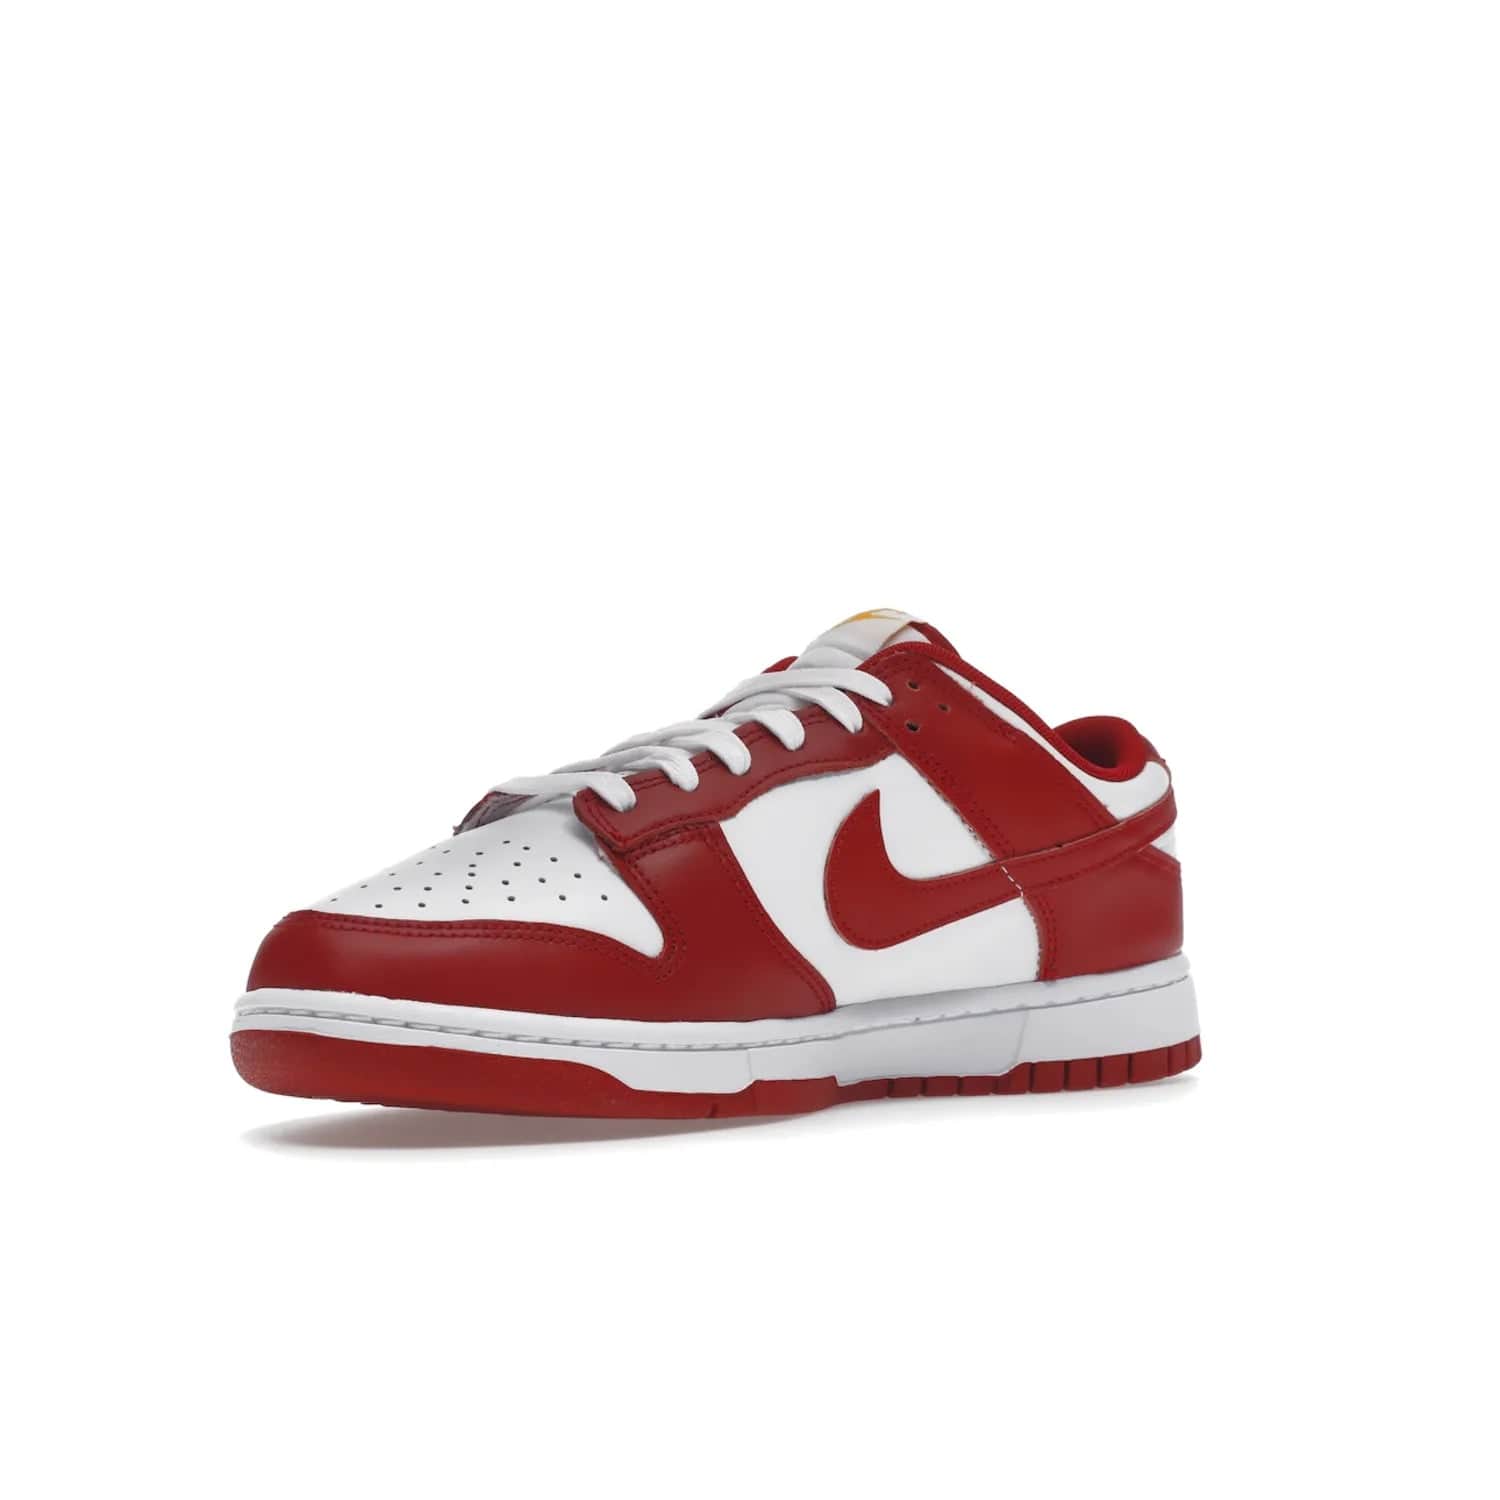 Nike Dunk Low USC - Image 15 - Only at www.BallersClubKickz.com - The Nike Dunk Low USC DD1391-602 colorway captures the eye of University of Southern California fans. Crafted with leather and rubber upper and outsole, this stylish sneaker features a white, gym red, and yellow colorway. With yellow Nike branding, white perforated vamp, and red suede Swoosh, this sneaker turns heads. Get the classic Nike Dunk Low USC releasing on November 9th, 2022.